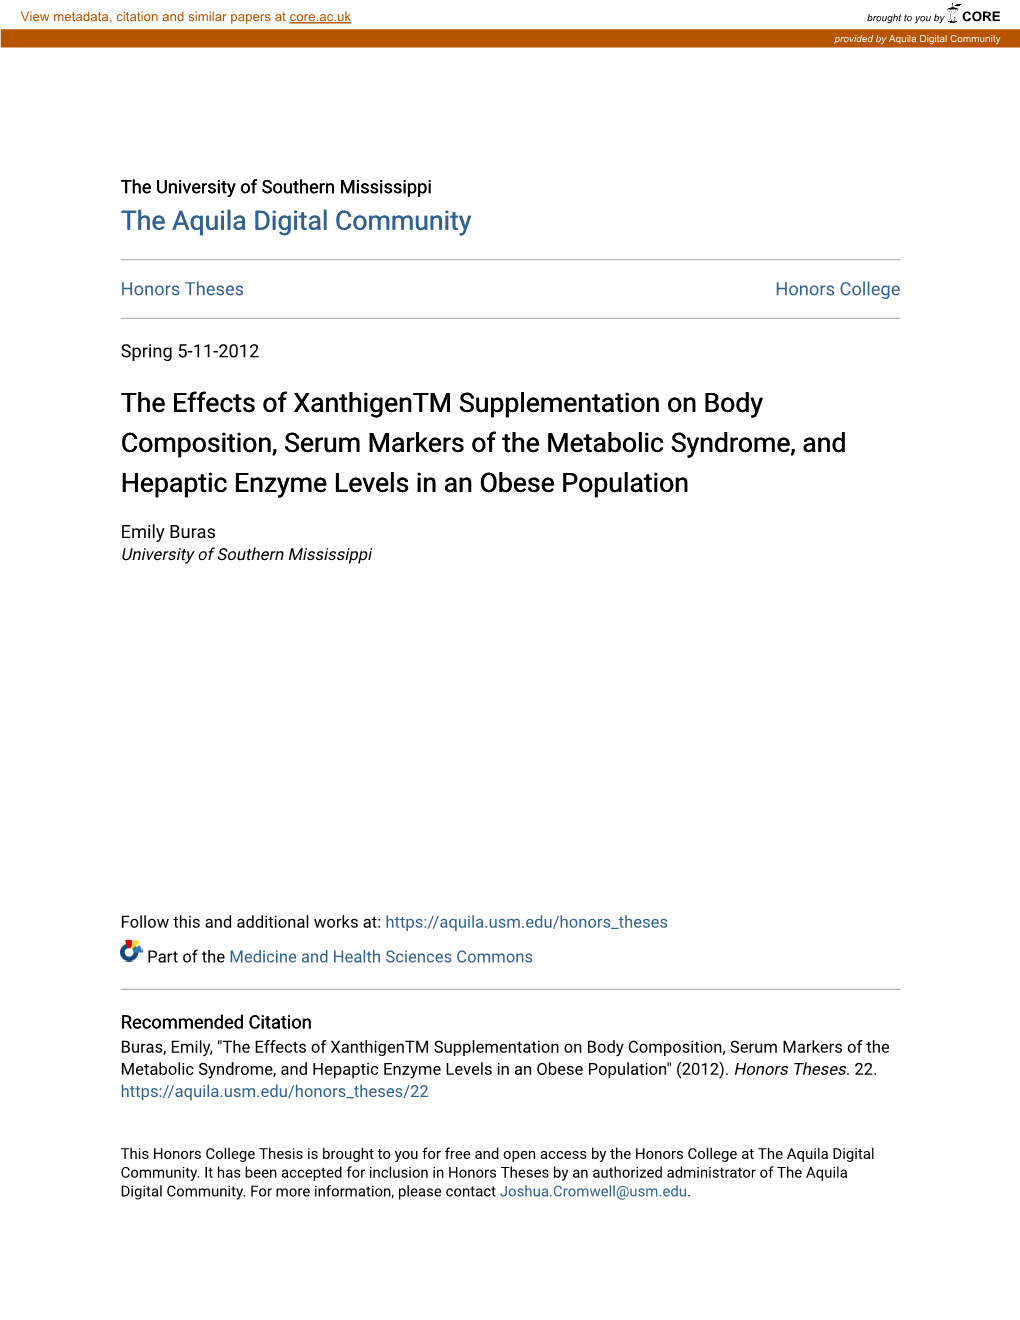 The Effects of Xanthigentm Supplementation on Body Composition, Serum Markers of the Metabolic Syndrome, and Hepaptic Enzyme Levels in an Obese Population